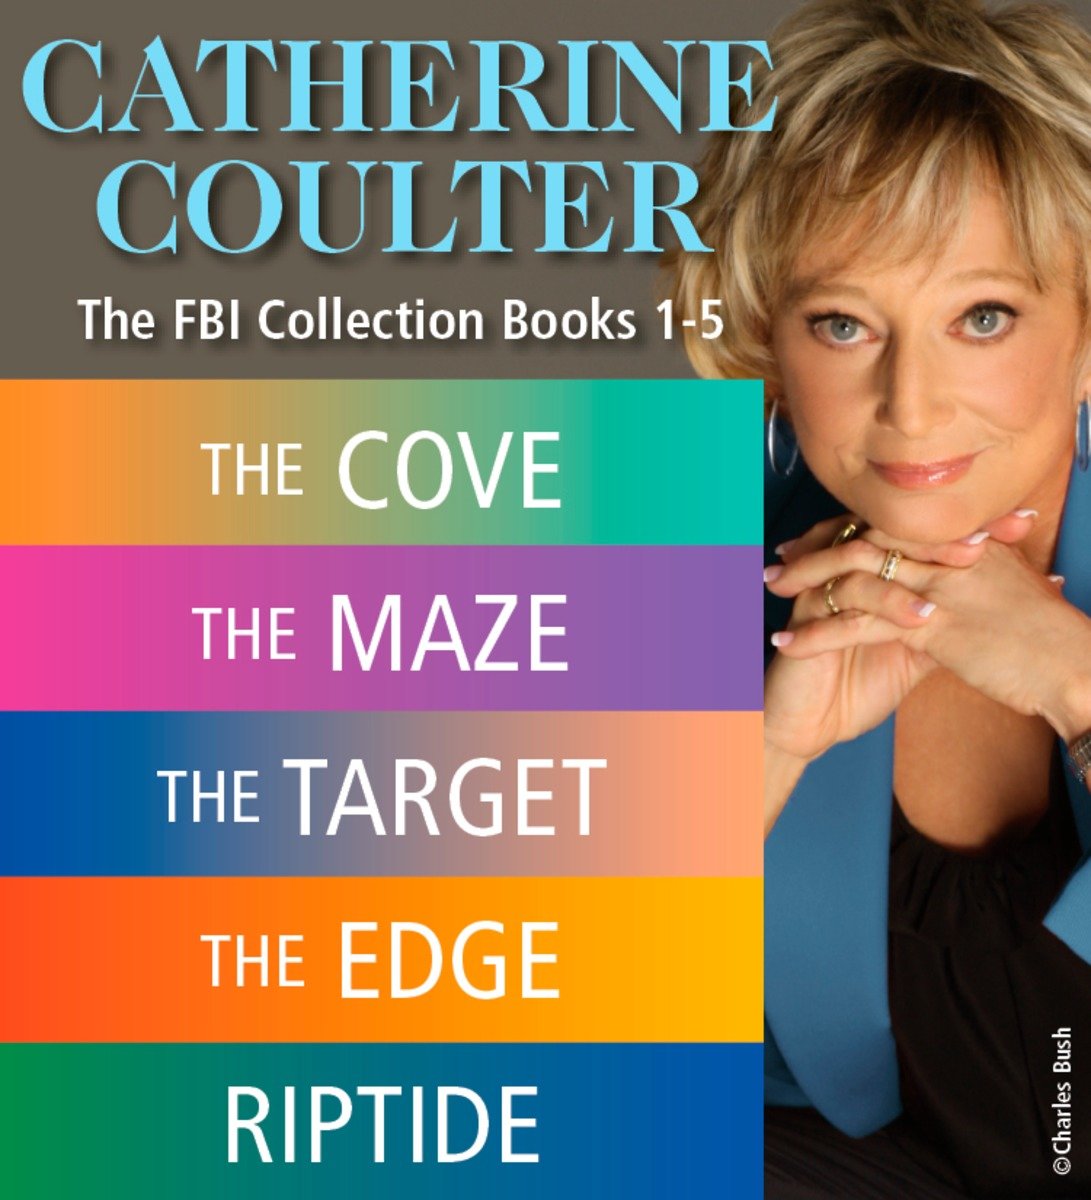 Image de couverture de Catherine Coulter THE FBI THRILLERS COLLECTION Books 1-5 [electronic resource] :